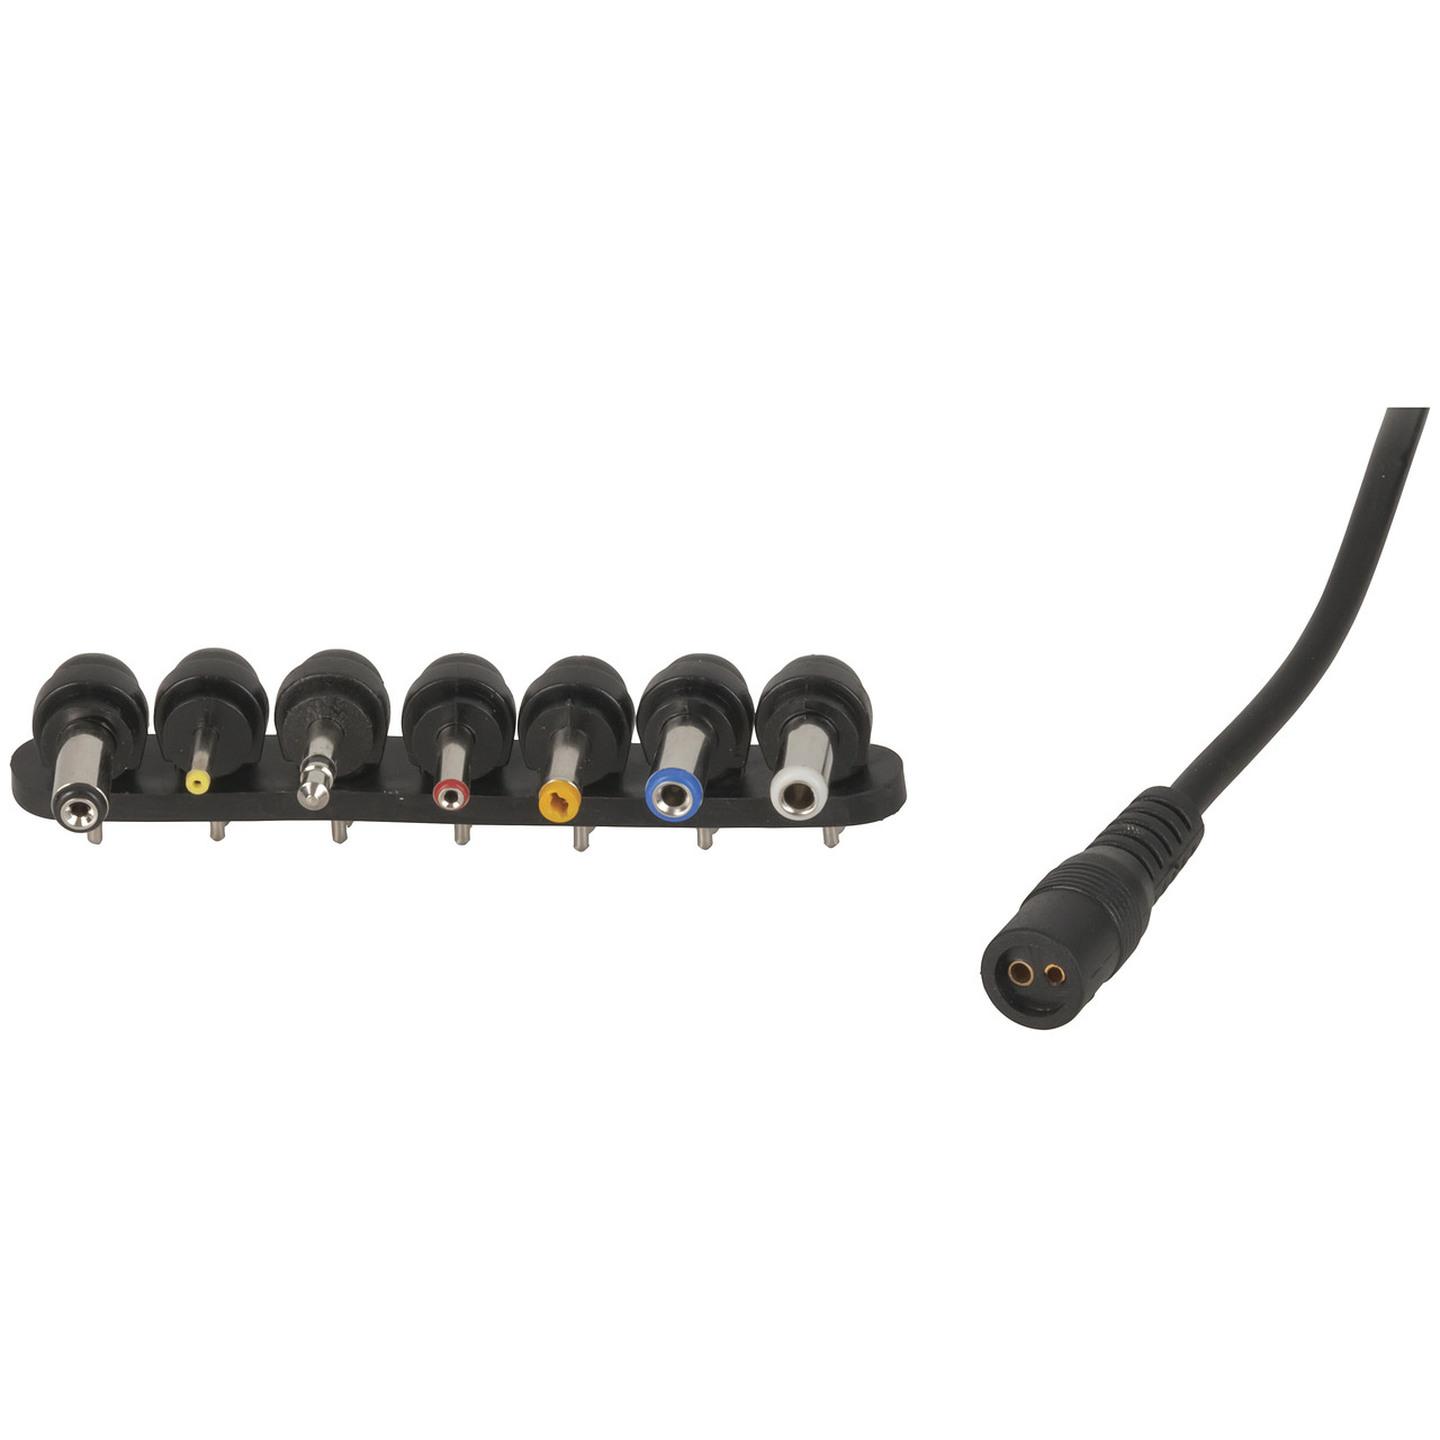 15VAC 1.5A Unregulated Power Supply 7DC Plugs